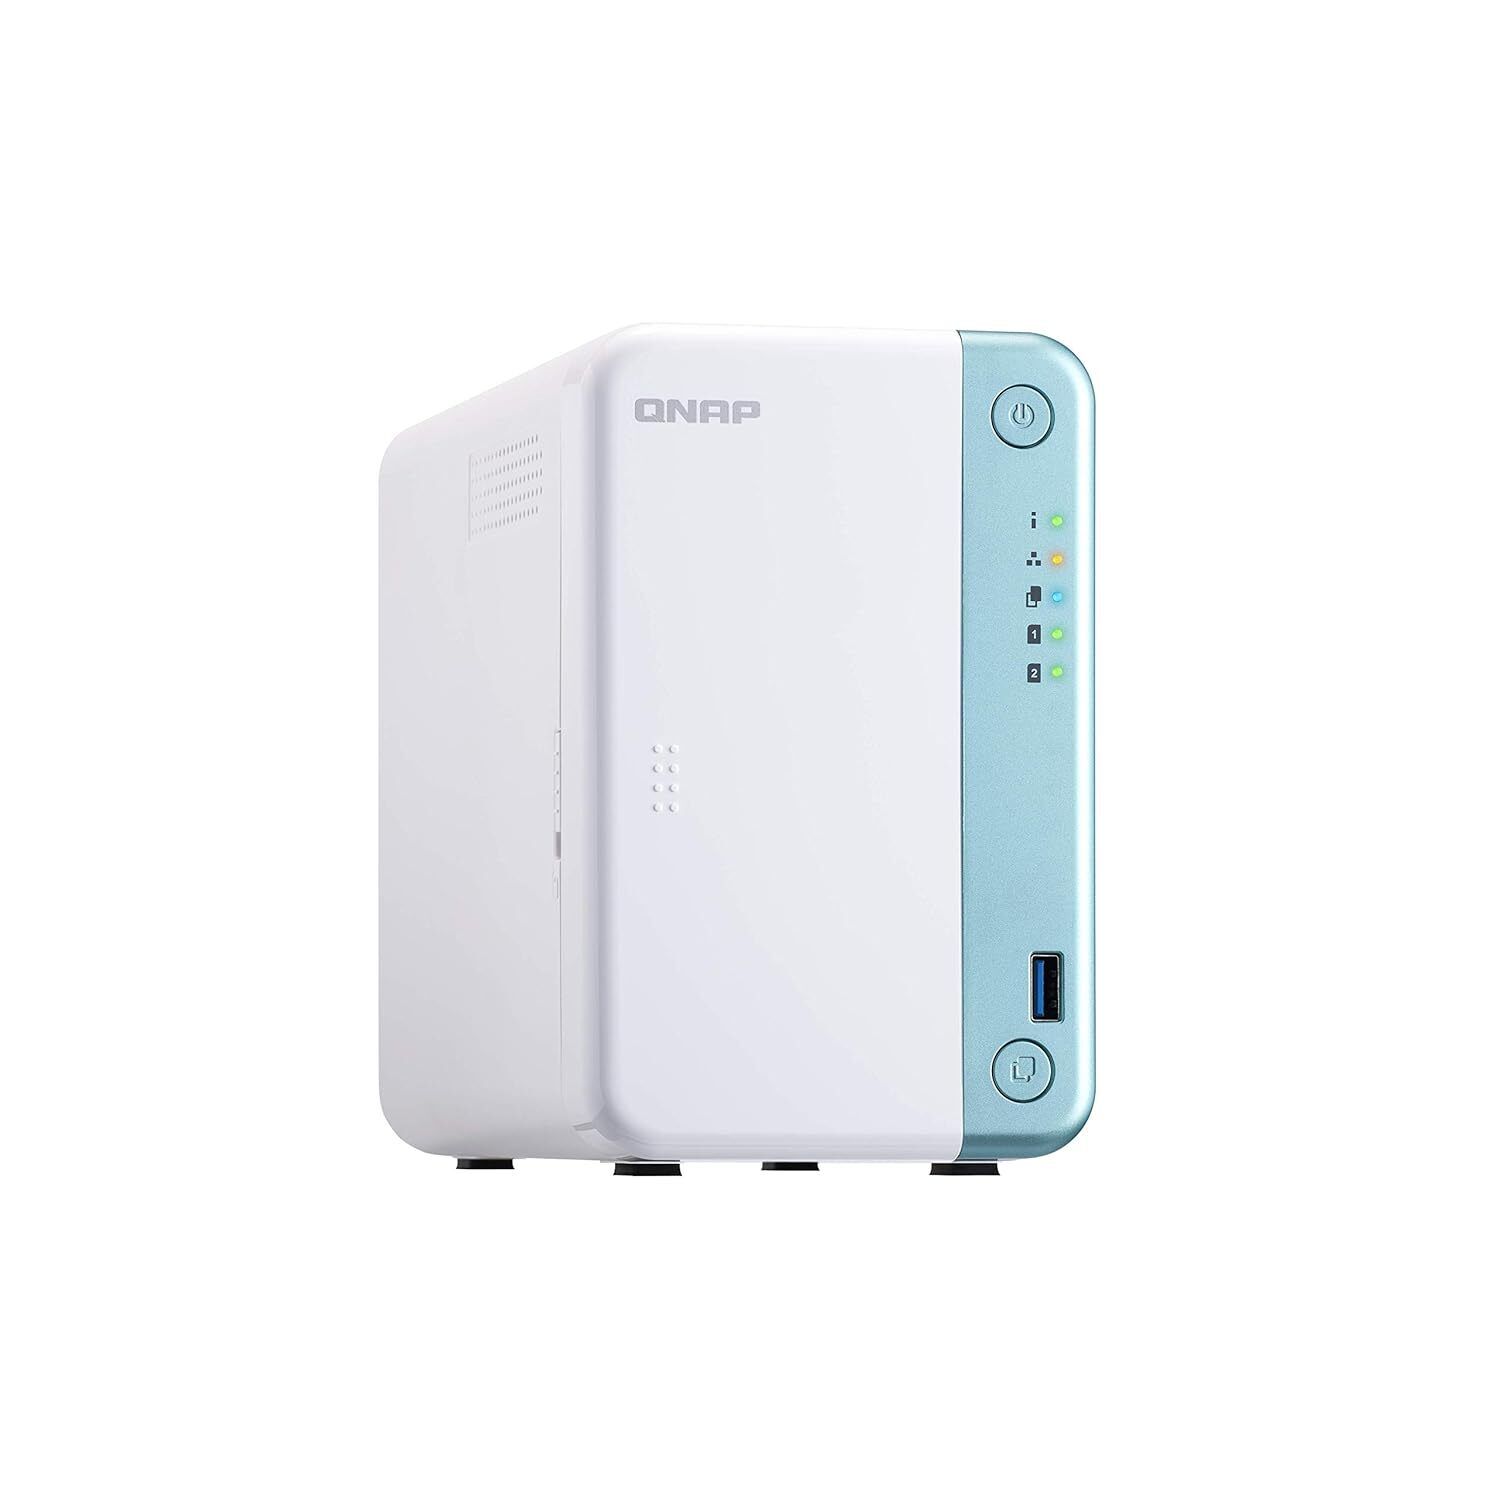 QNAP TS-251D-2G 2 Bay Home NAS with Intel Celeron J4005 CPU and One 1GbE Port